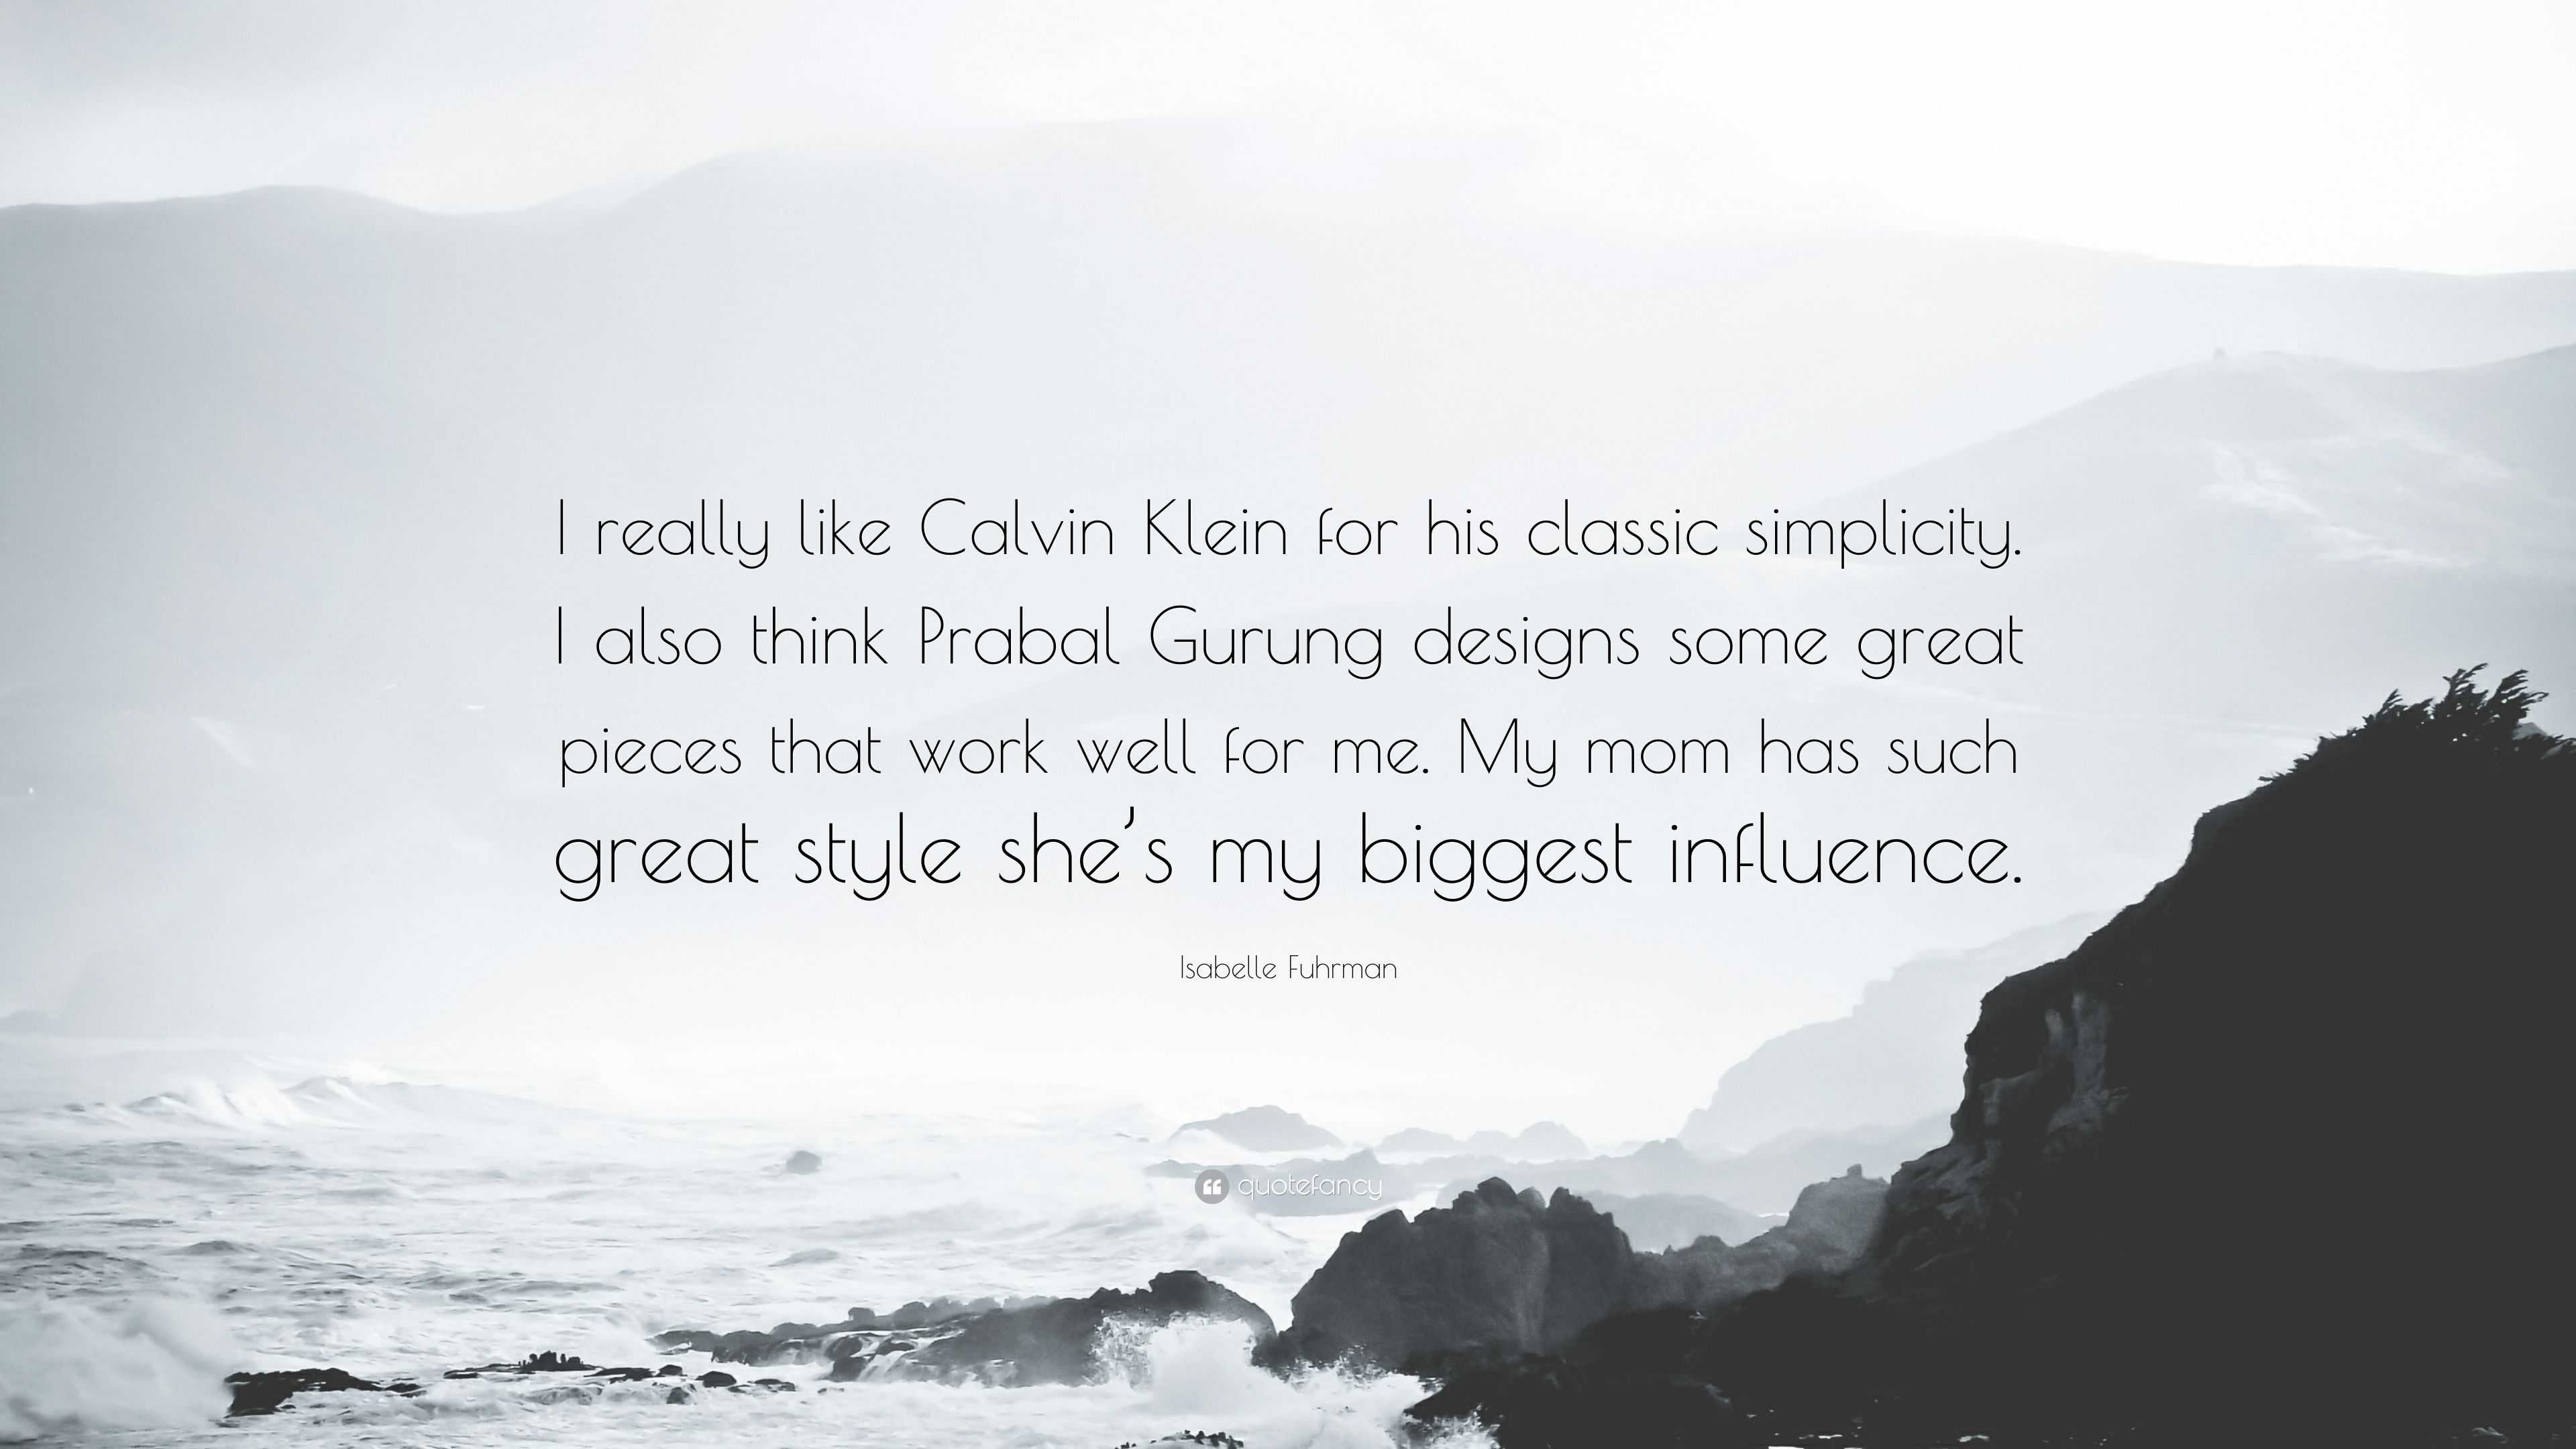 Isabelle Fuhrman Quote: “I really like Calvin Klein for his classic  simplicity. I also think Prabal Gurung designs some great pieces that work  we...”